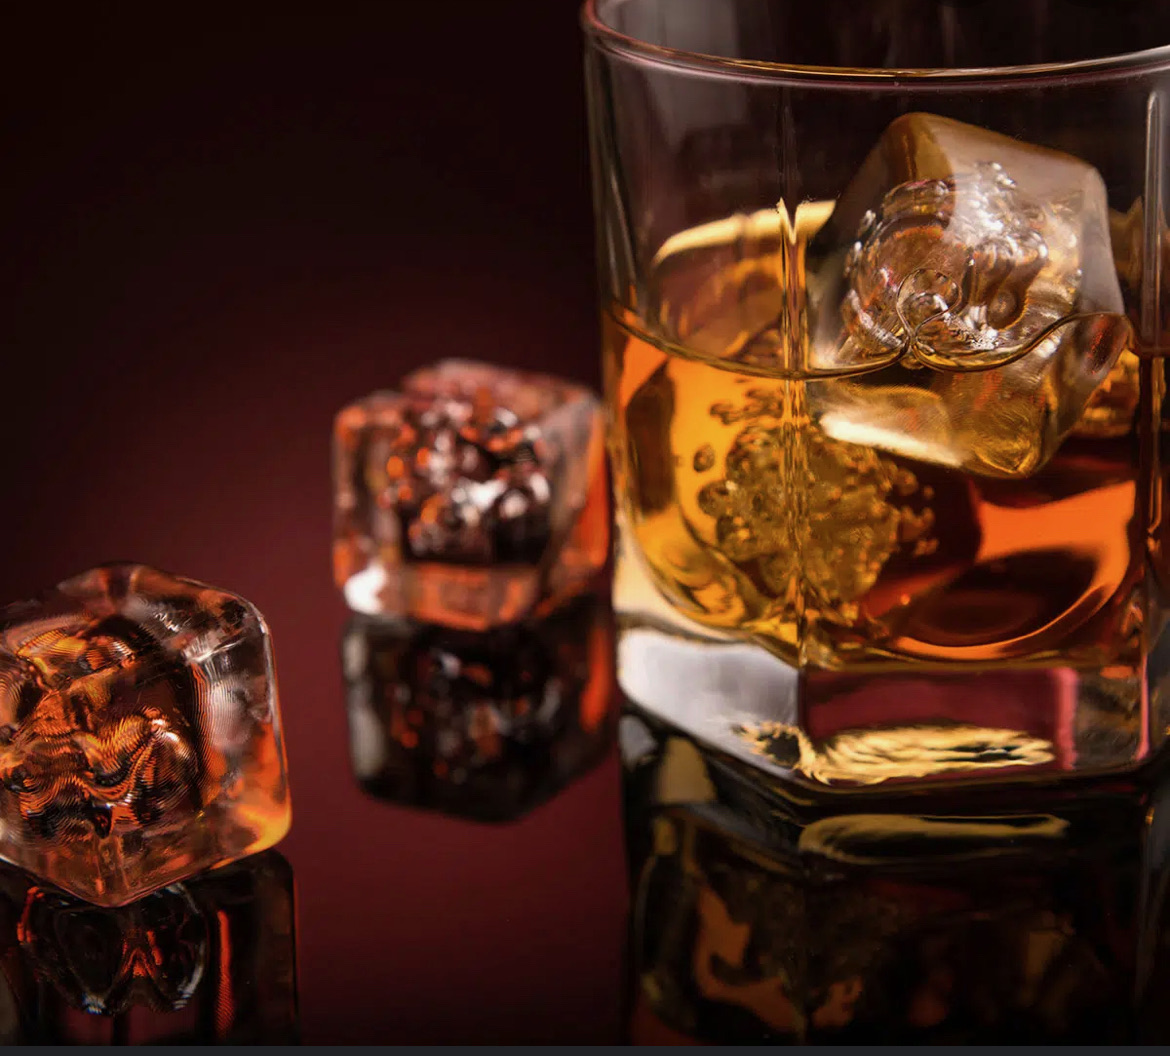 Yesterday was national Bourbon day, Hope you enjoyed your favorite bourbon! Cover Photo